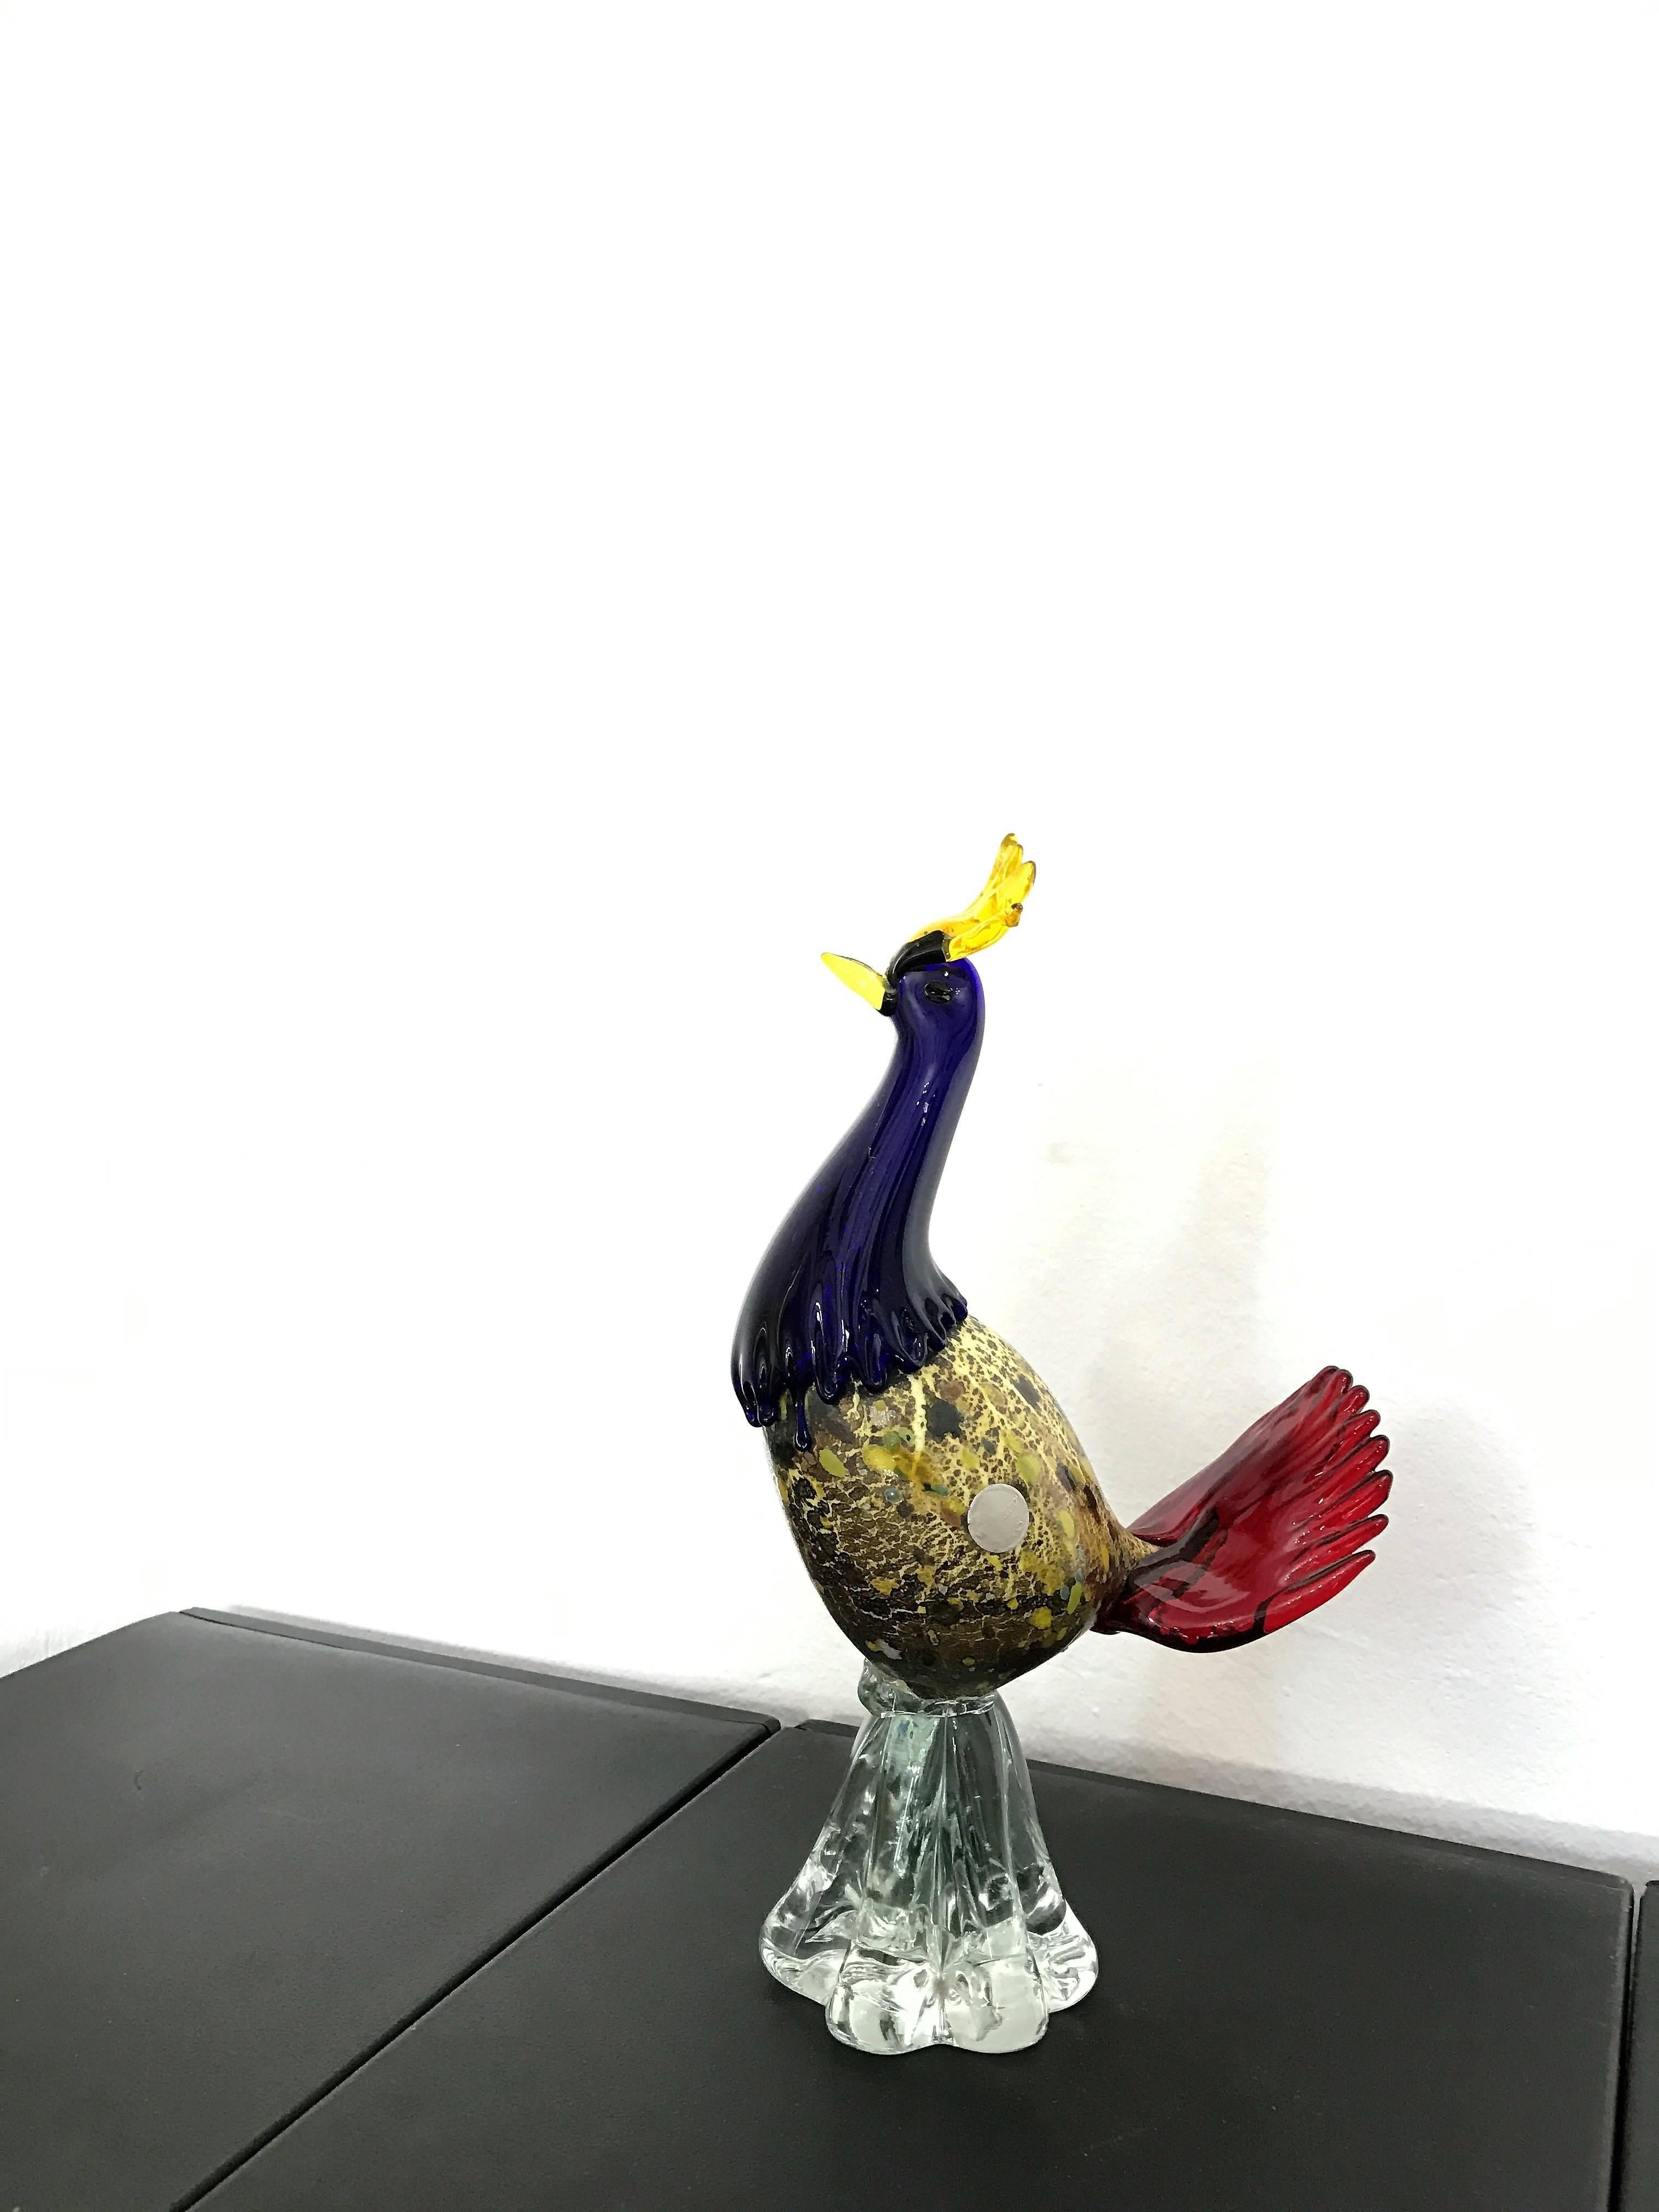 Beautiful blown glass sculpture Murano, Italy depicting rooster from the particular color.